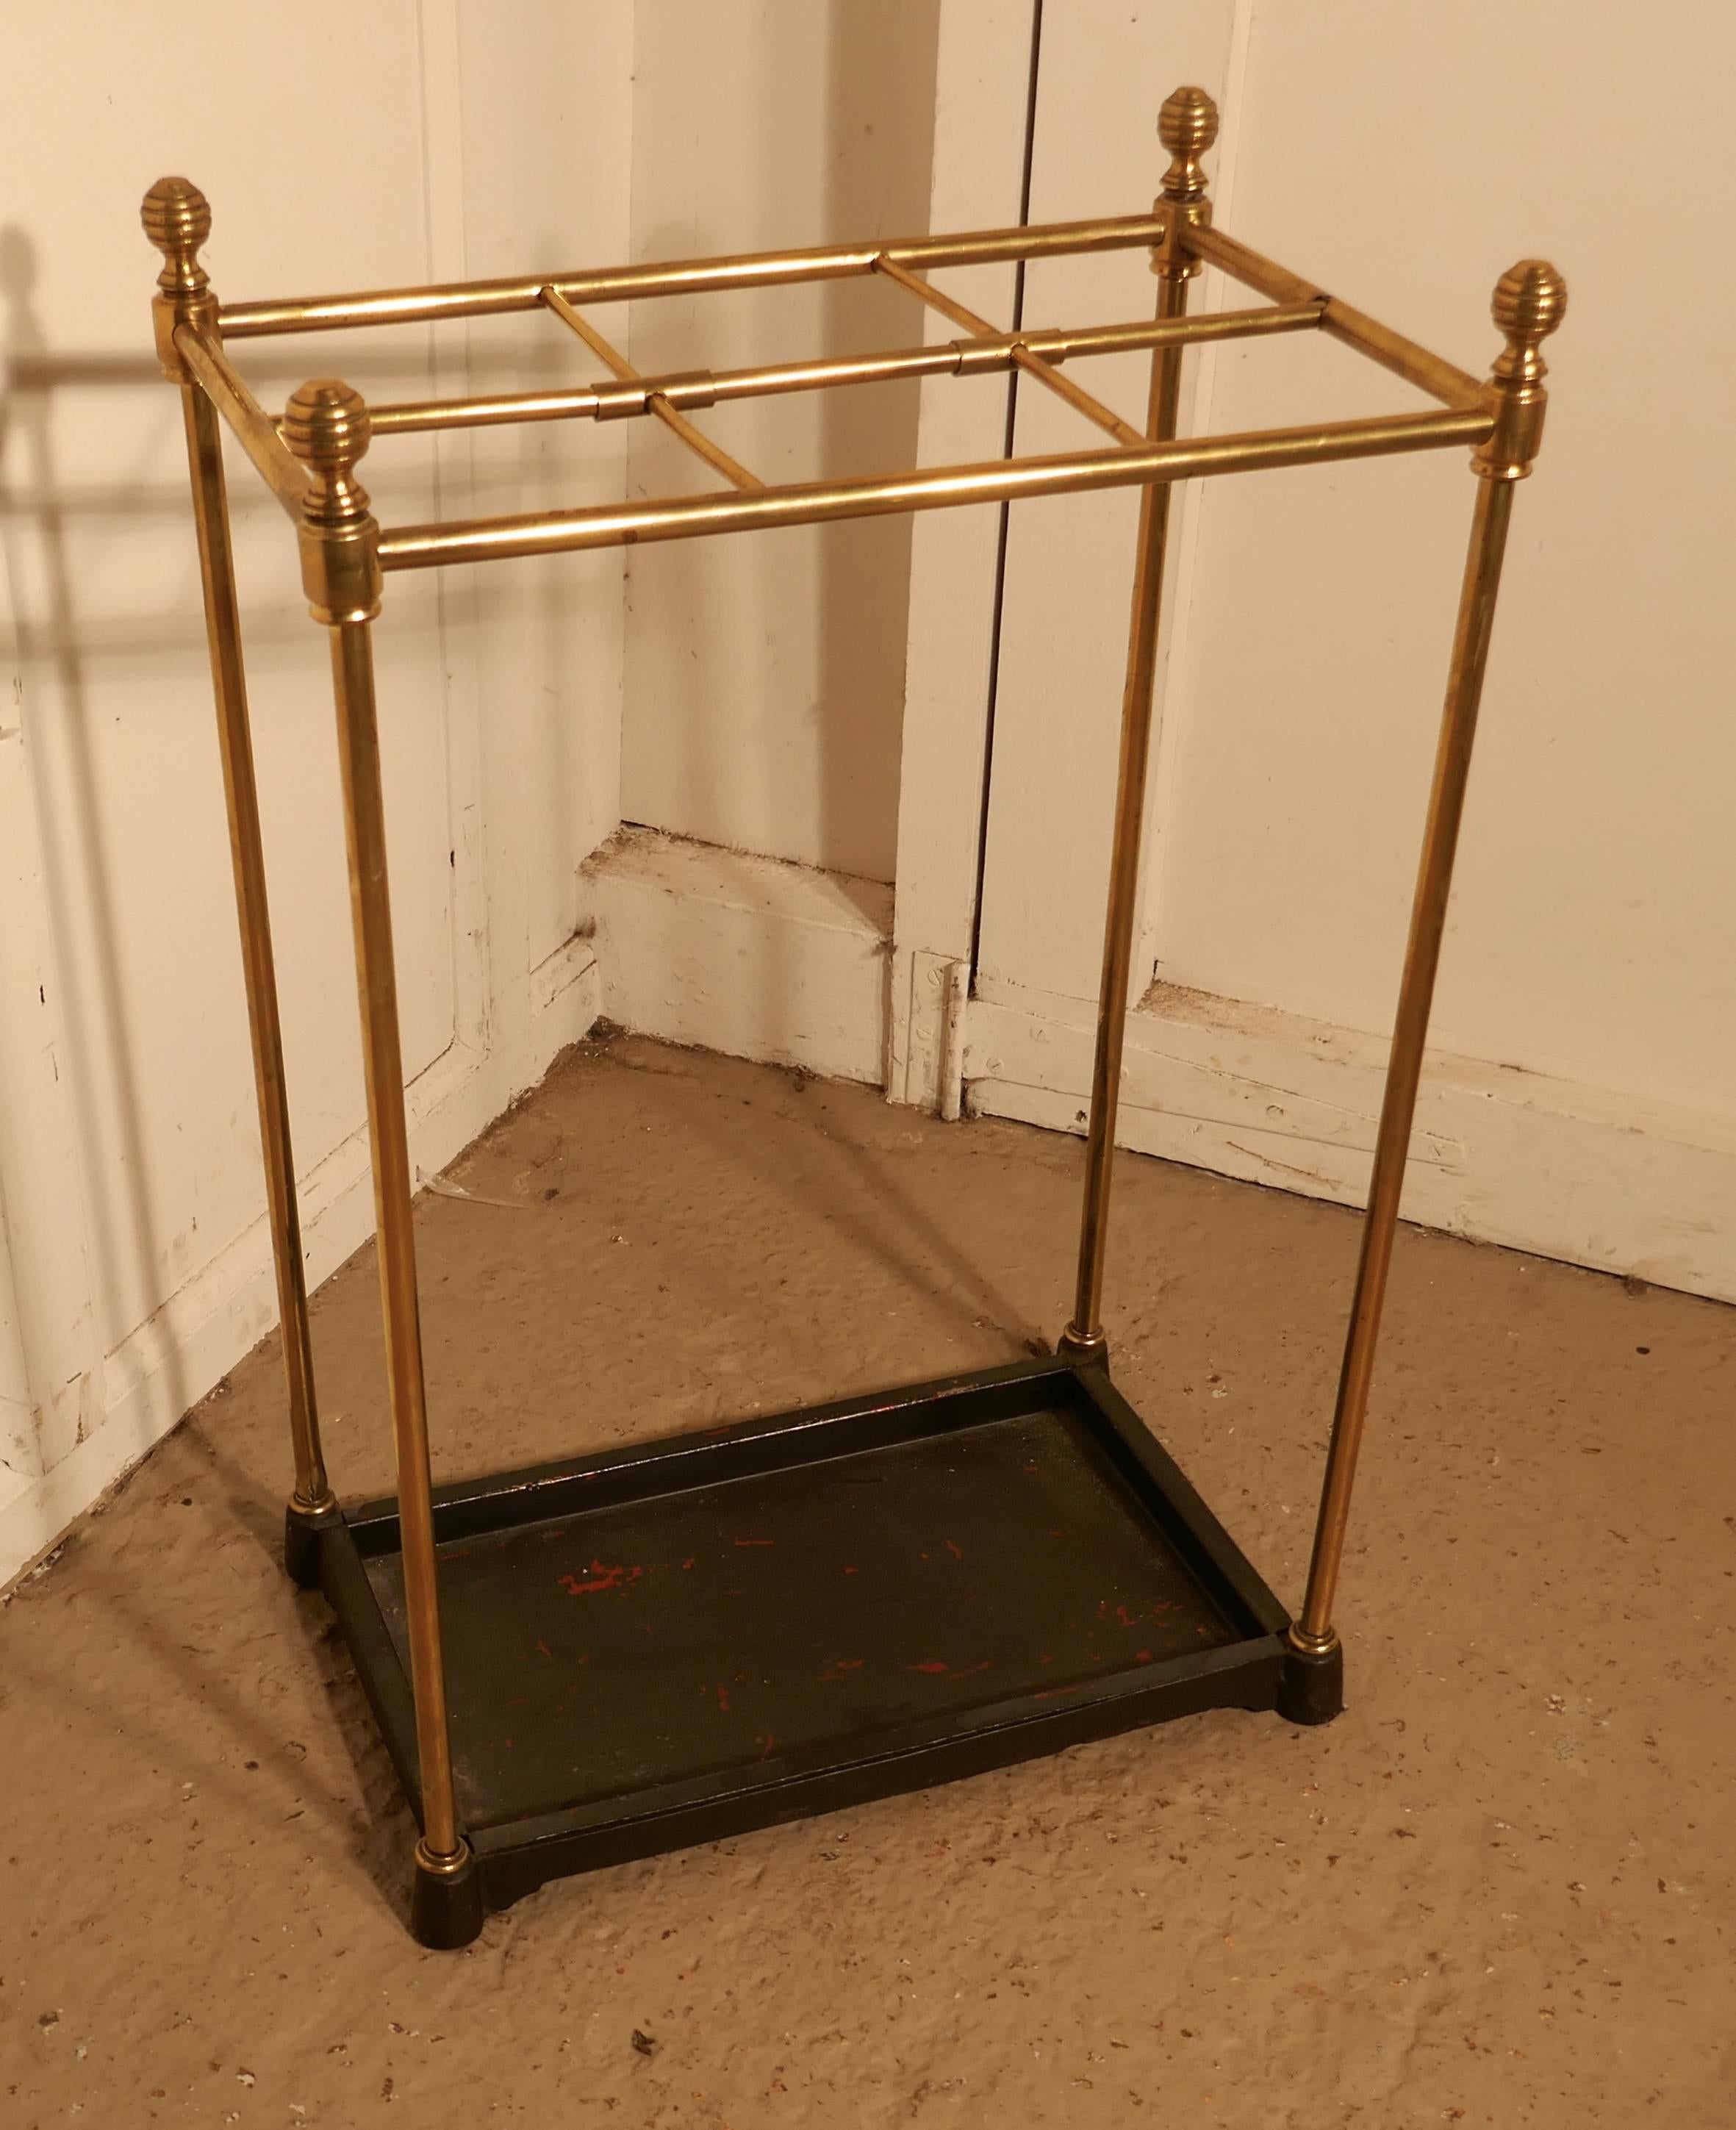 A Victorian brass and cast iron stick stand or umbrella stand


A charming piece, the stand has a brass top divided into 6 sections to hold either walking sticks or umbrellas, the heavy iron base has a removable drip tray
The stand is in good